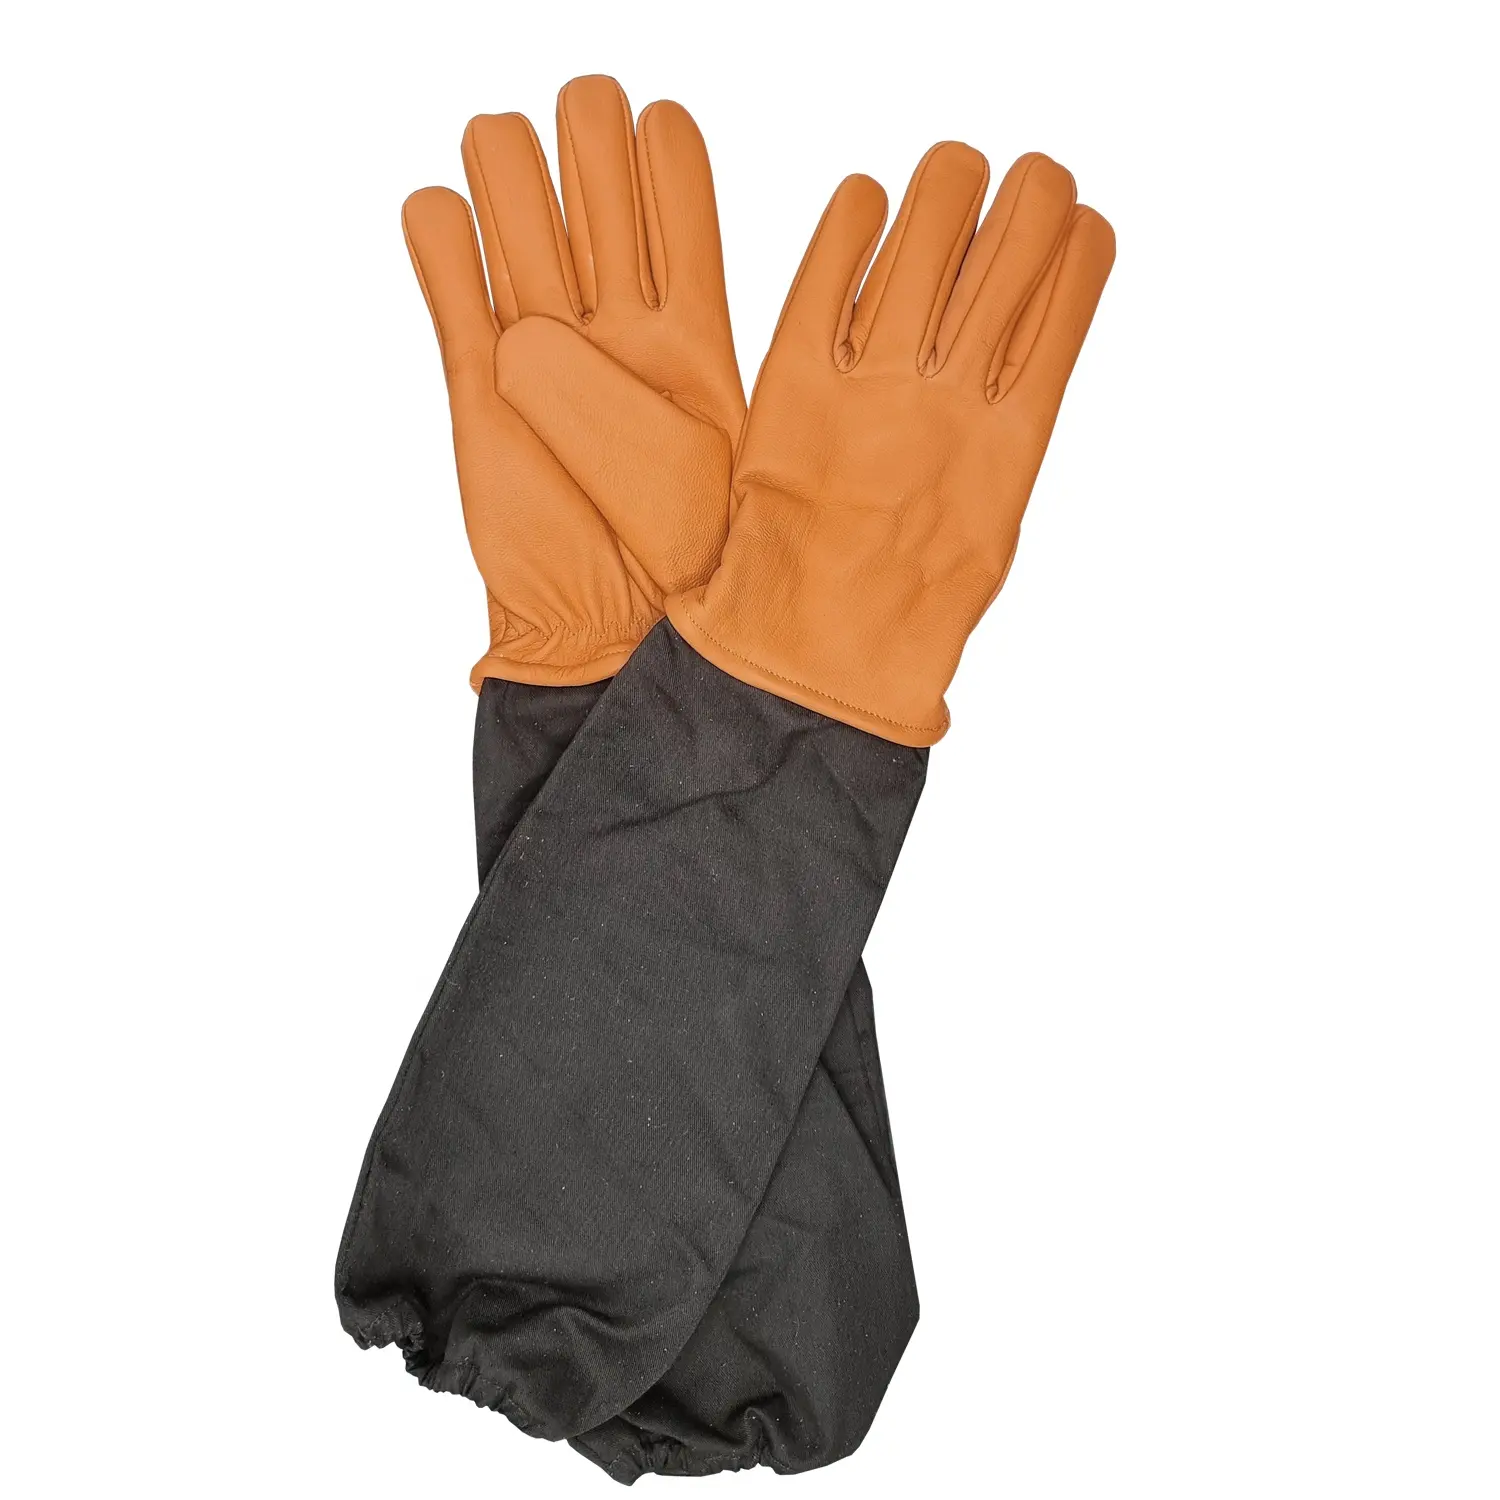 ODM Humane safety gloves long sleeve cuff jeans natural cowhide leather hand gloves animal control gloves pair custom design OEM